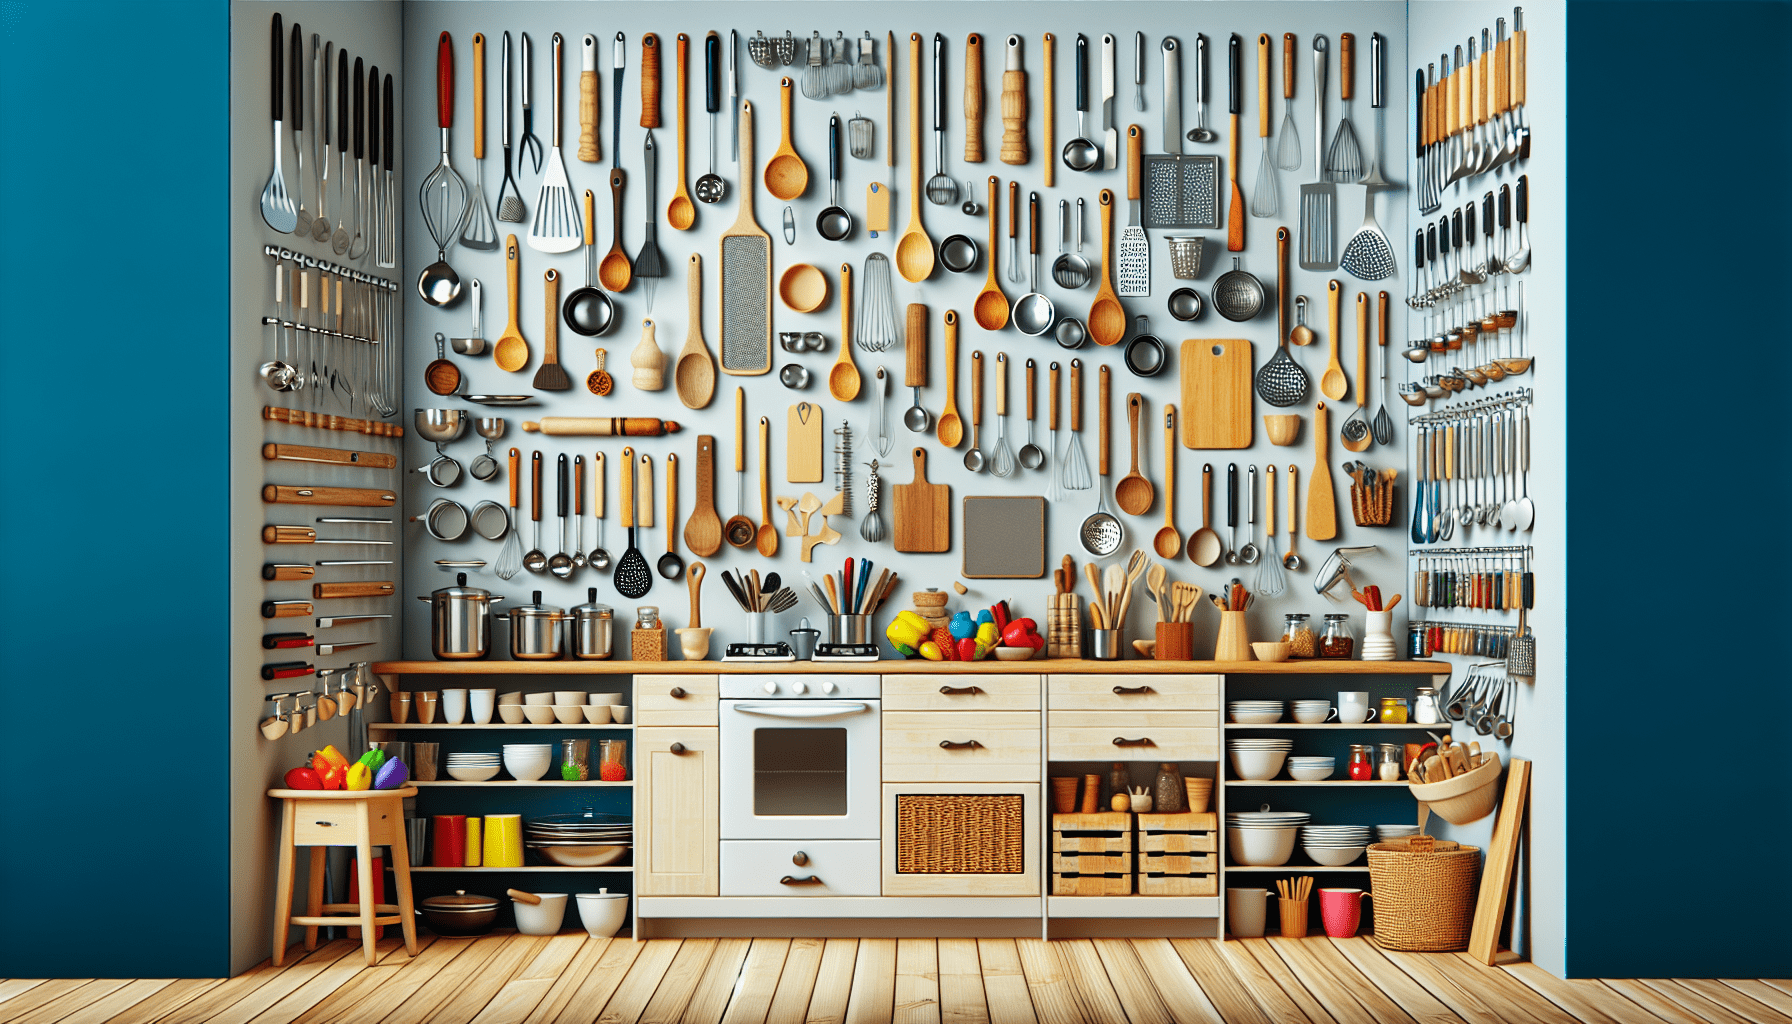 What Is The Most Efficient Way To Organize A Kitchen?